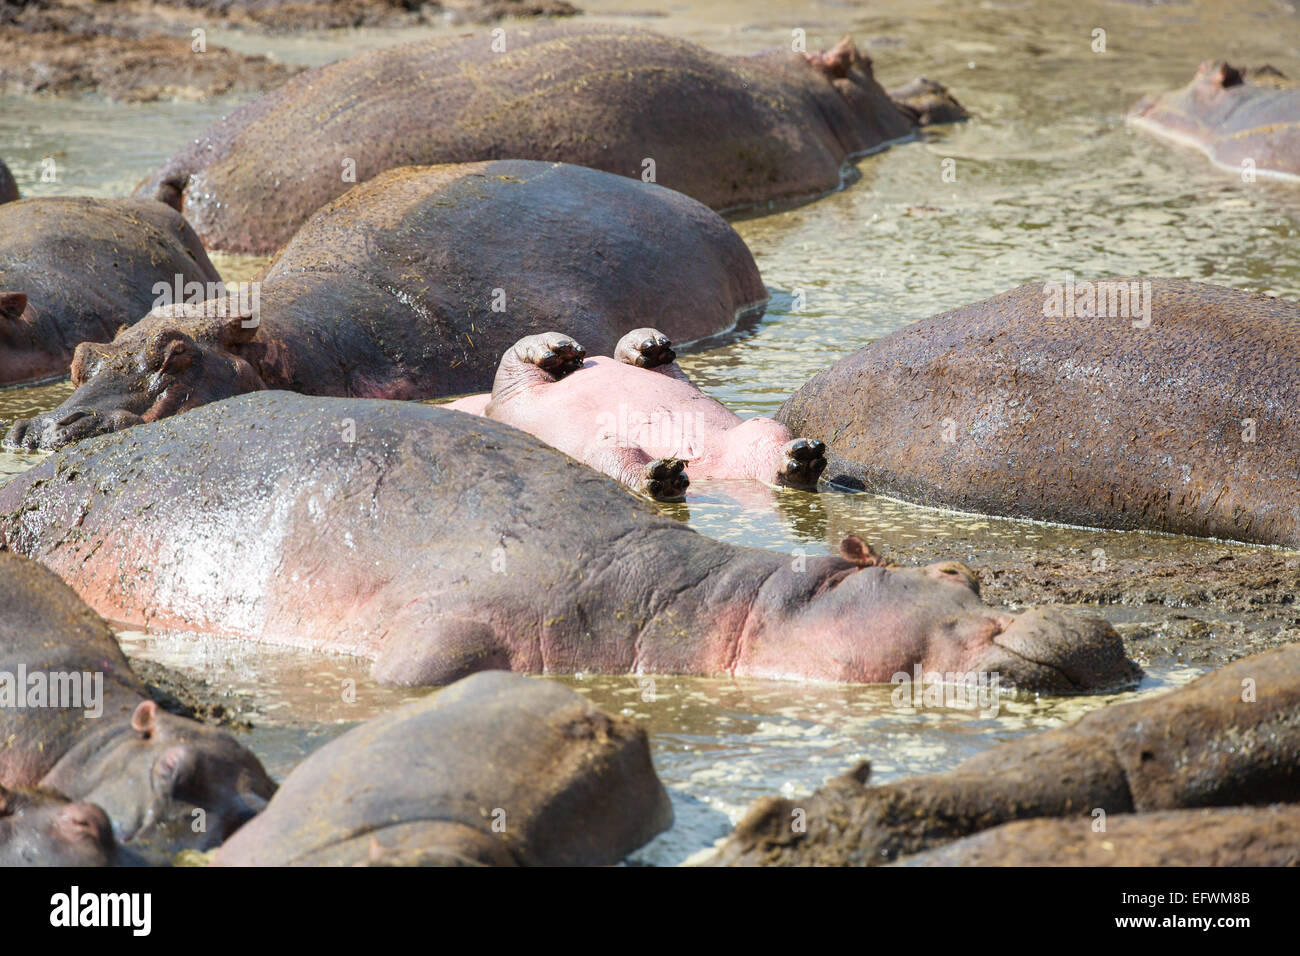 Young hippo sleeps upside down in water Stock Photo